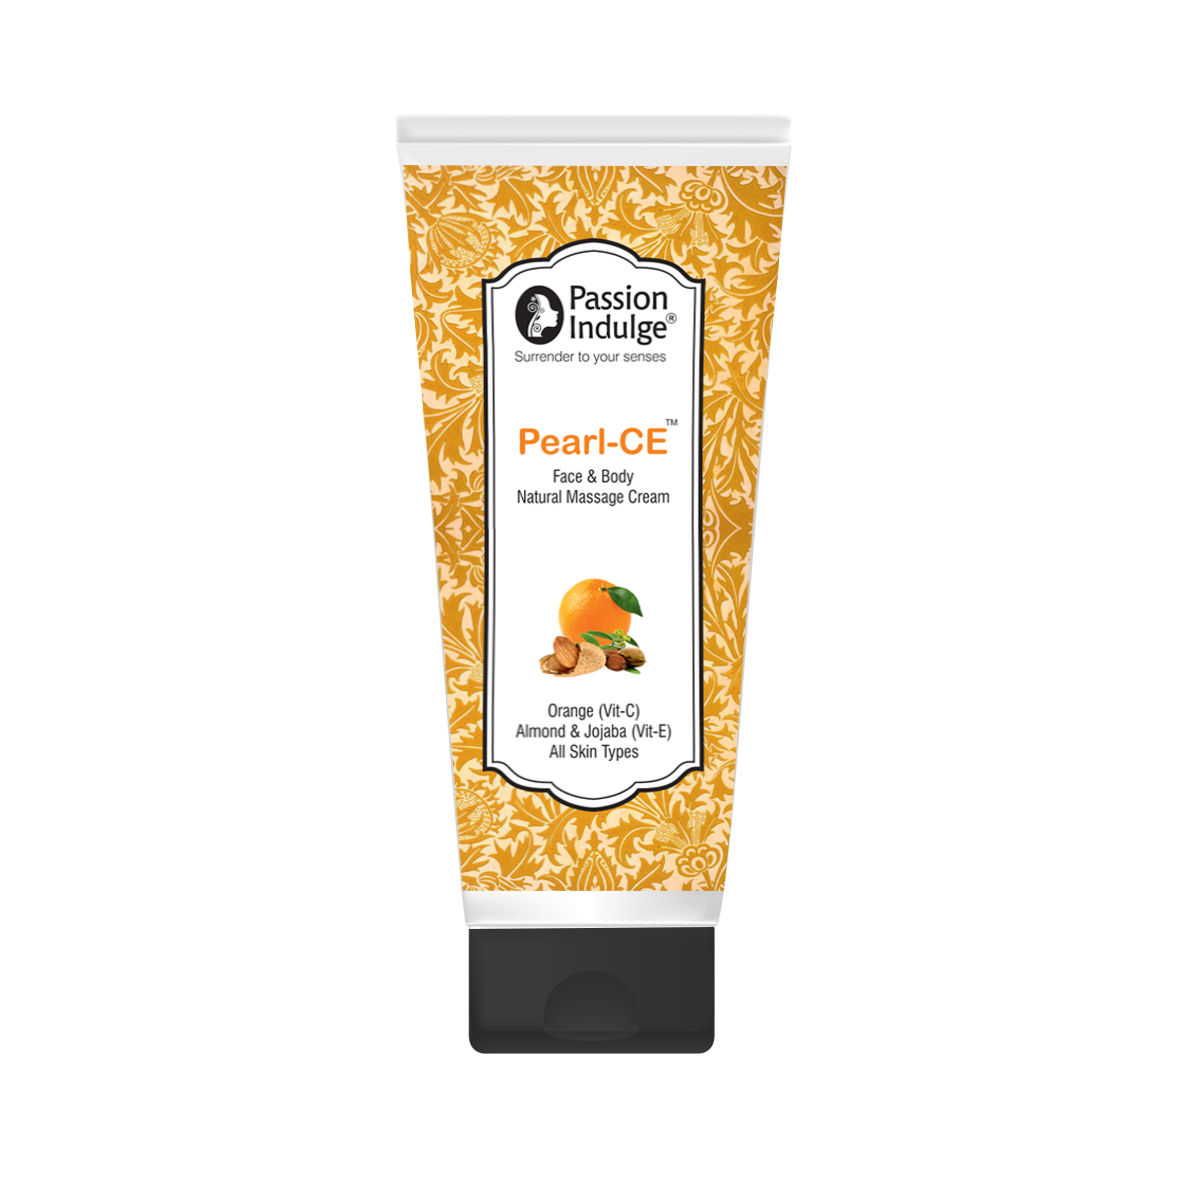 Passion Indulge Pearl-CE Face and Body Natural Massage Cream with Vitamin C and E